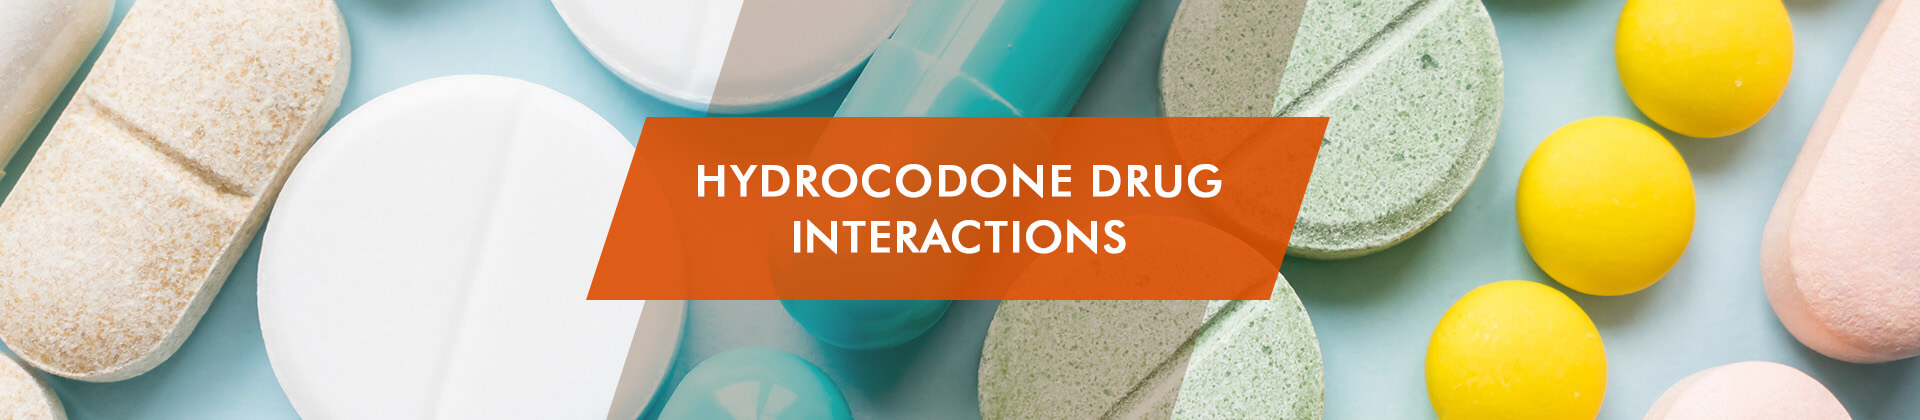 and interactions hydrocodone ambien